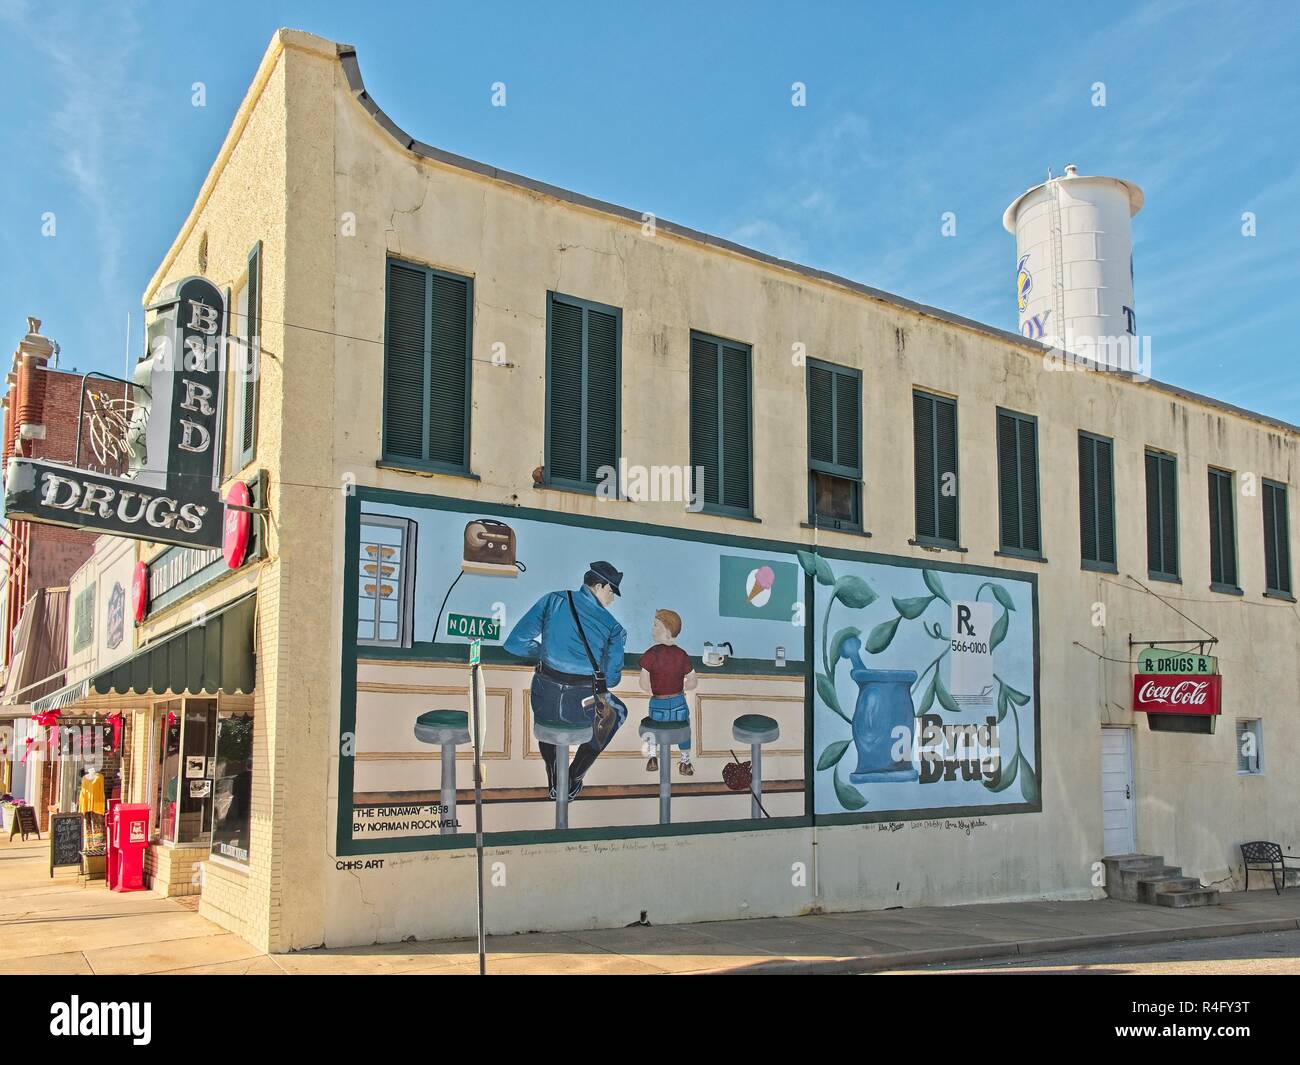 Byrd Drugs a small town drug store and pharmacy in Troy, Alabama, USA, has a large painted mural on the exterior. Stock Photo